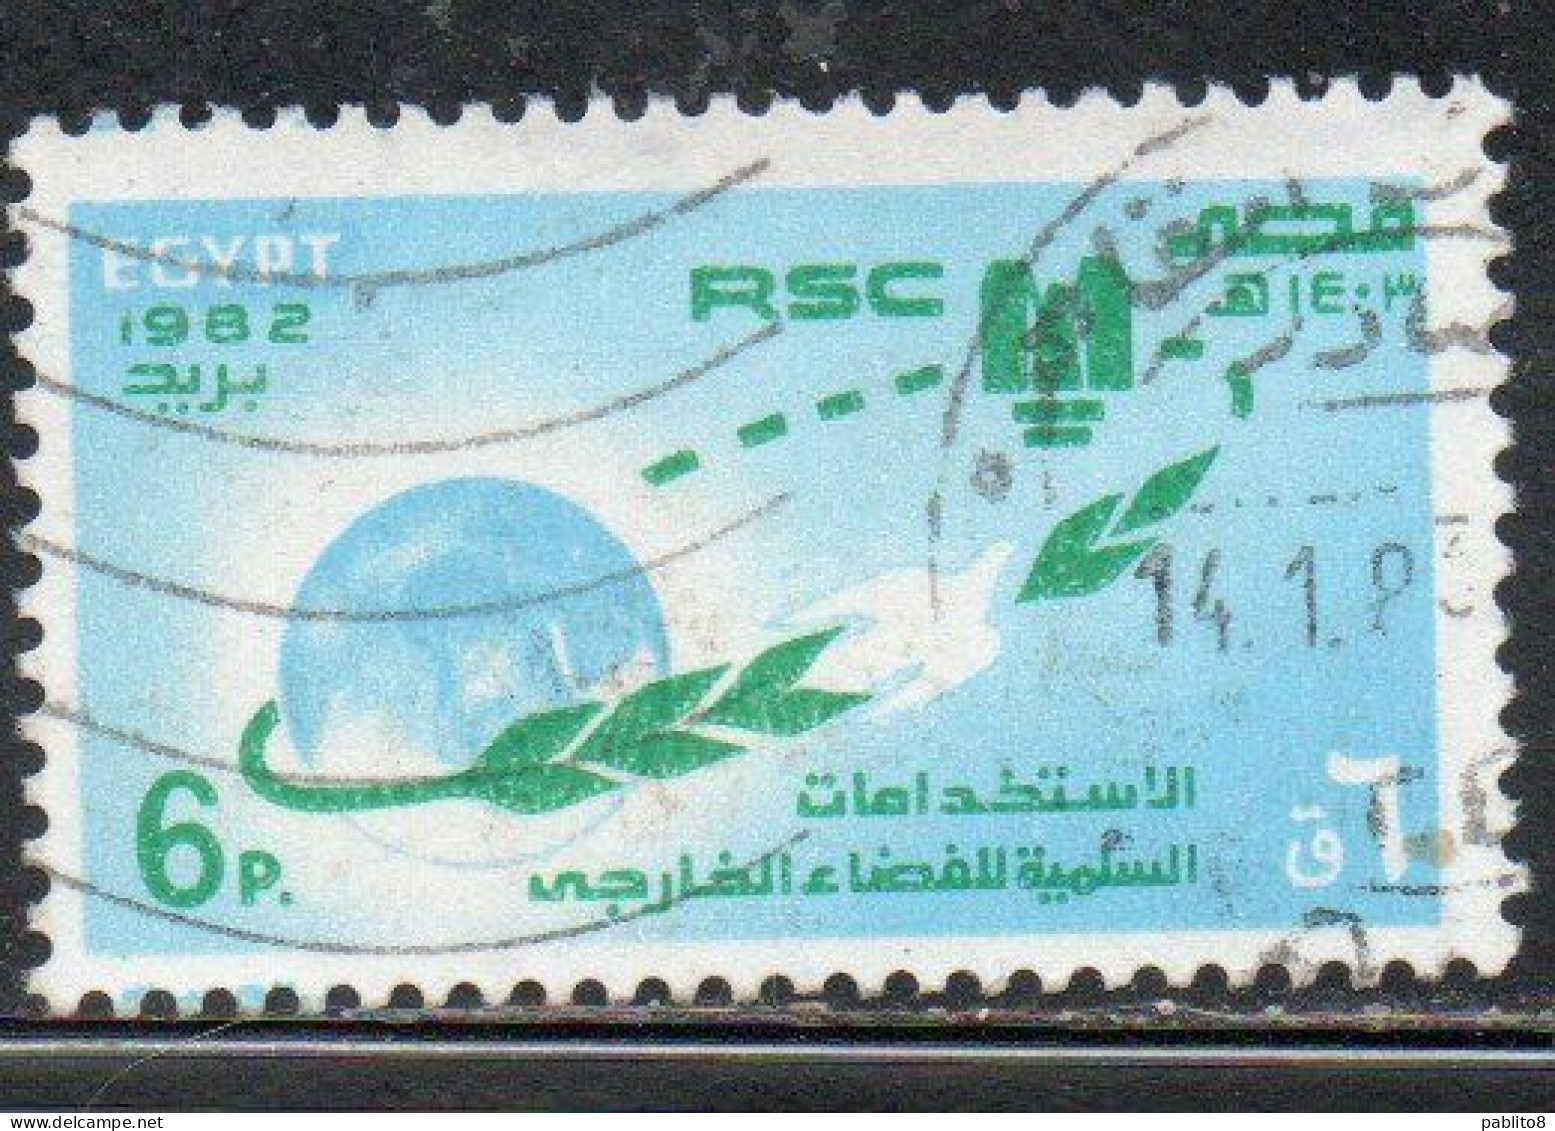 UAR EGYPT EGITTO 1982 UN ONU CONFERENCE ON PEACEFUL USES OF OUTER SPACE VIENNA 6p USED USATO OBLITERE' - Usados